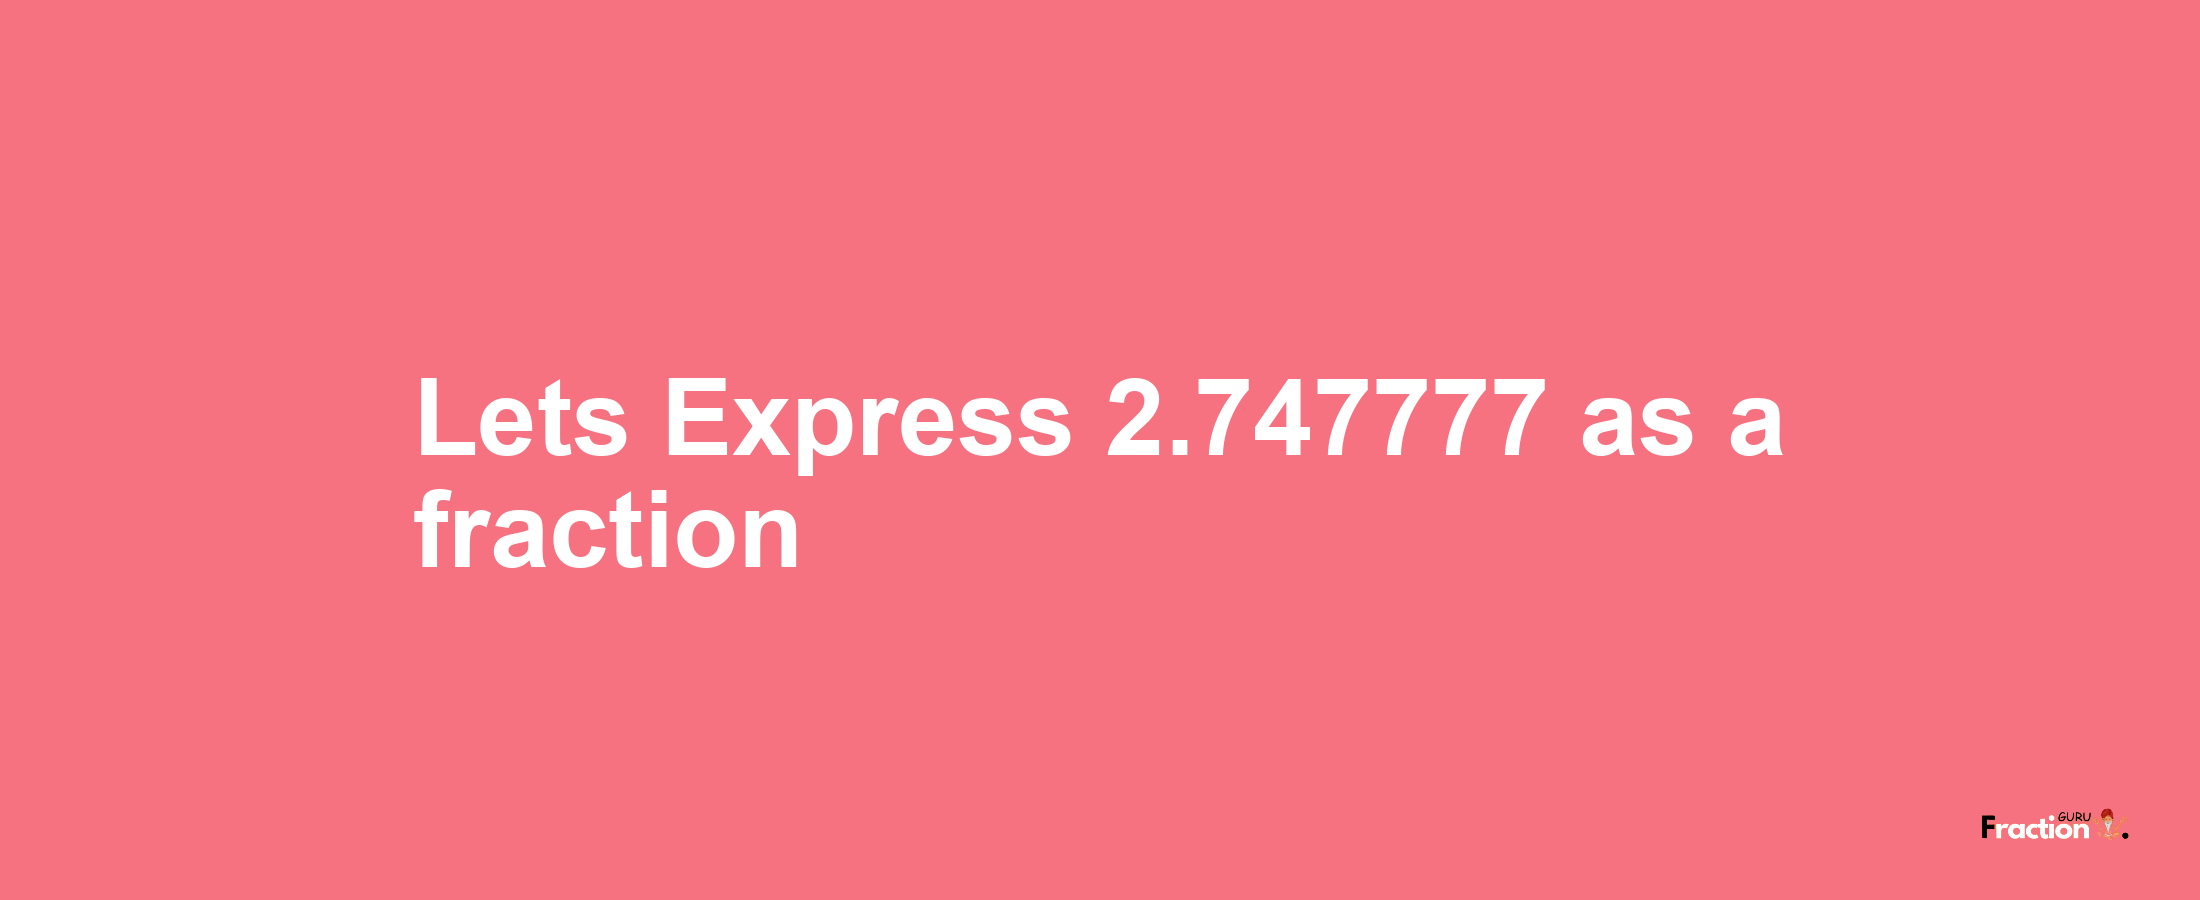 Lets Express 2.747777 as afraction